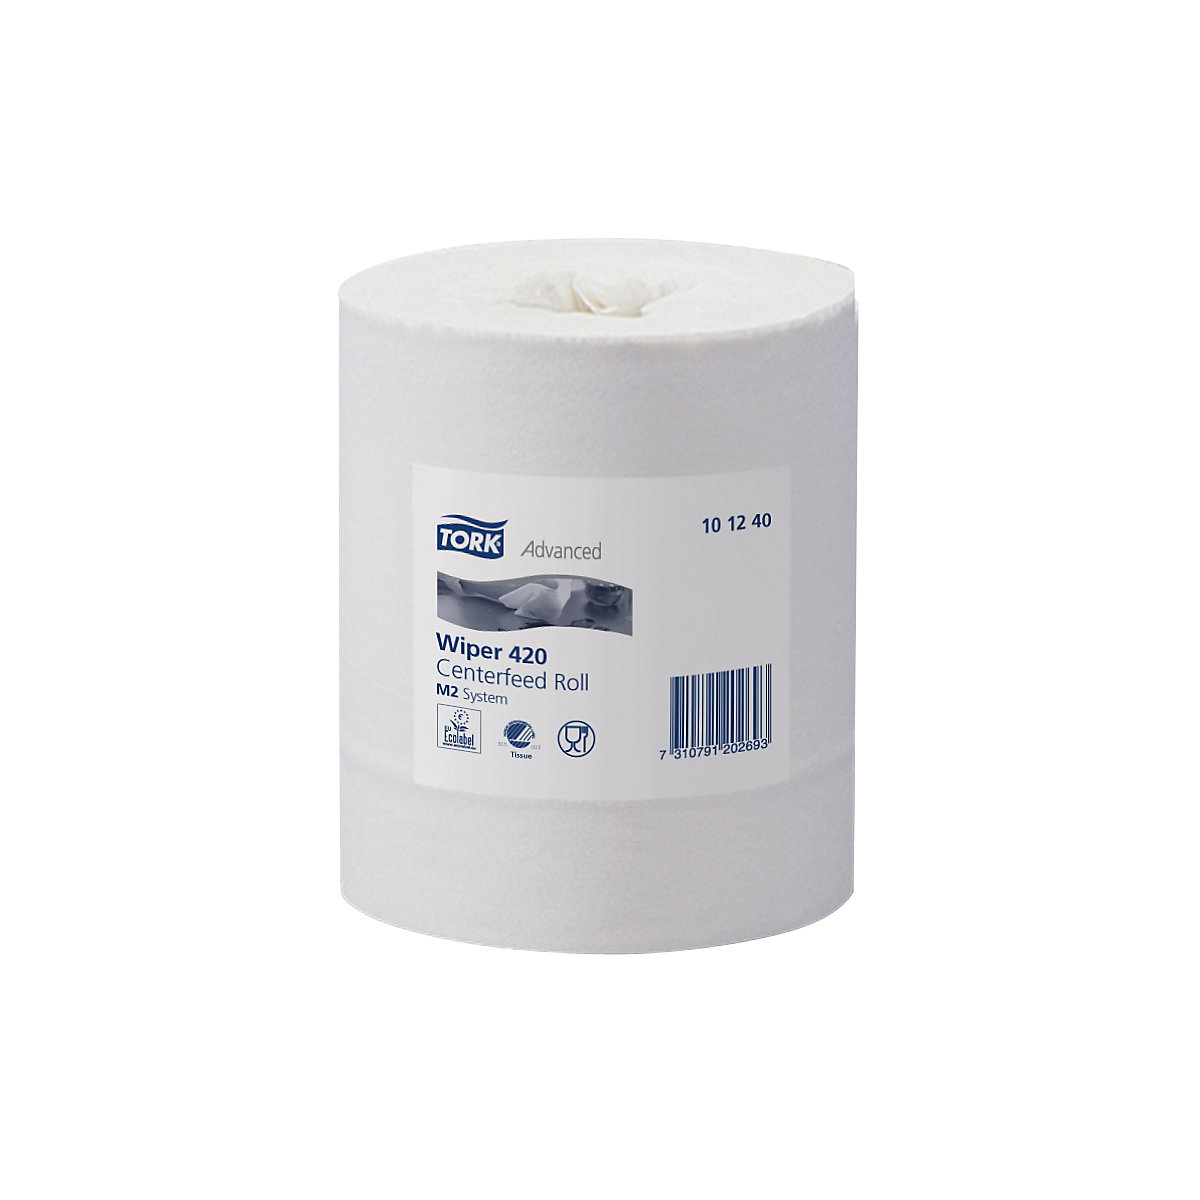 Strong multi-purpose centrefeed paper wipes – TORK (Product illustration 3)-2